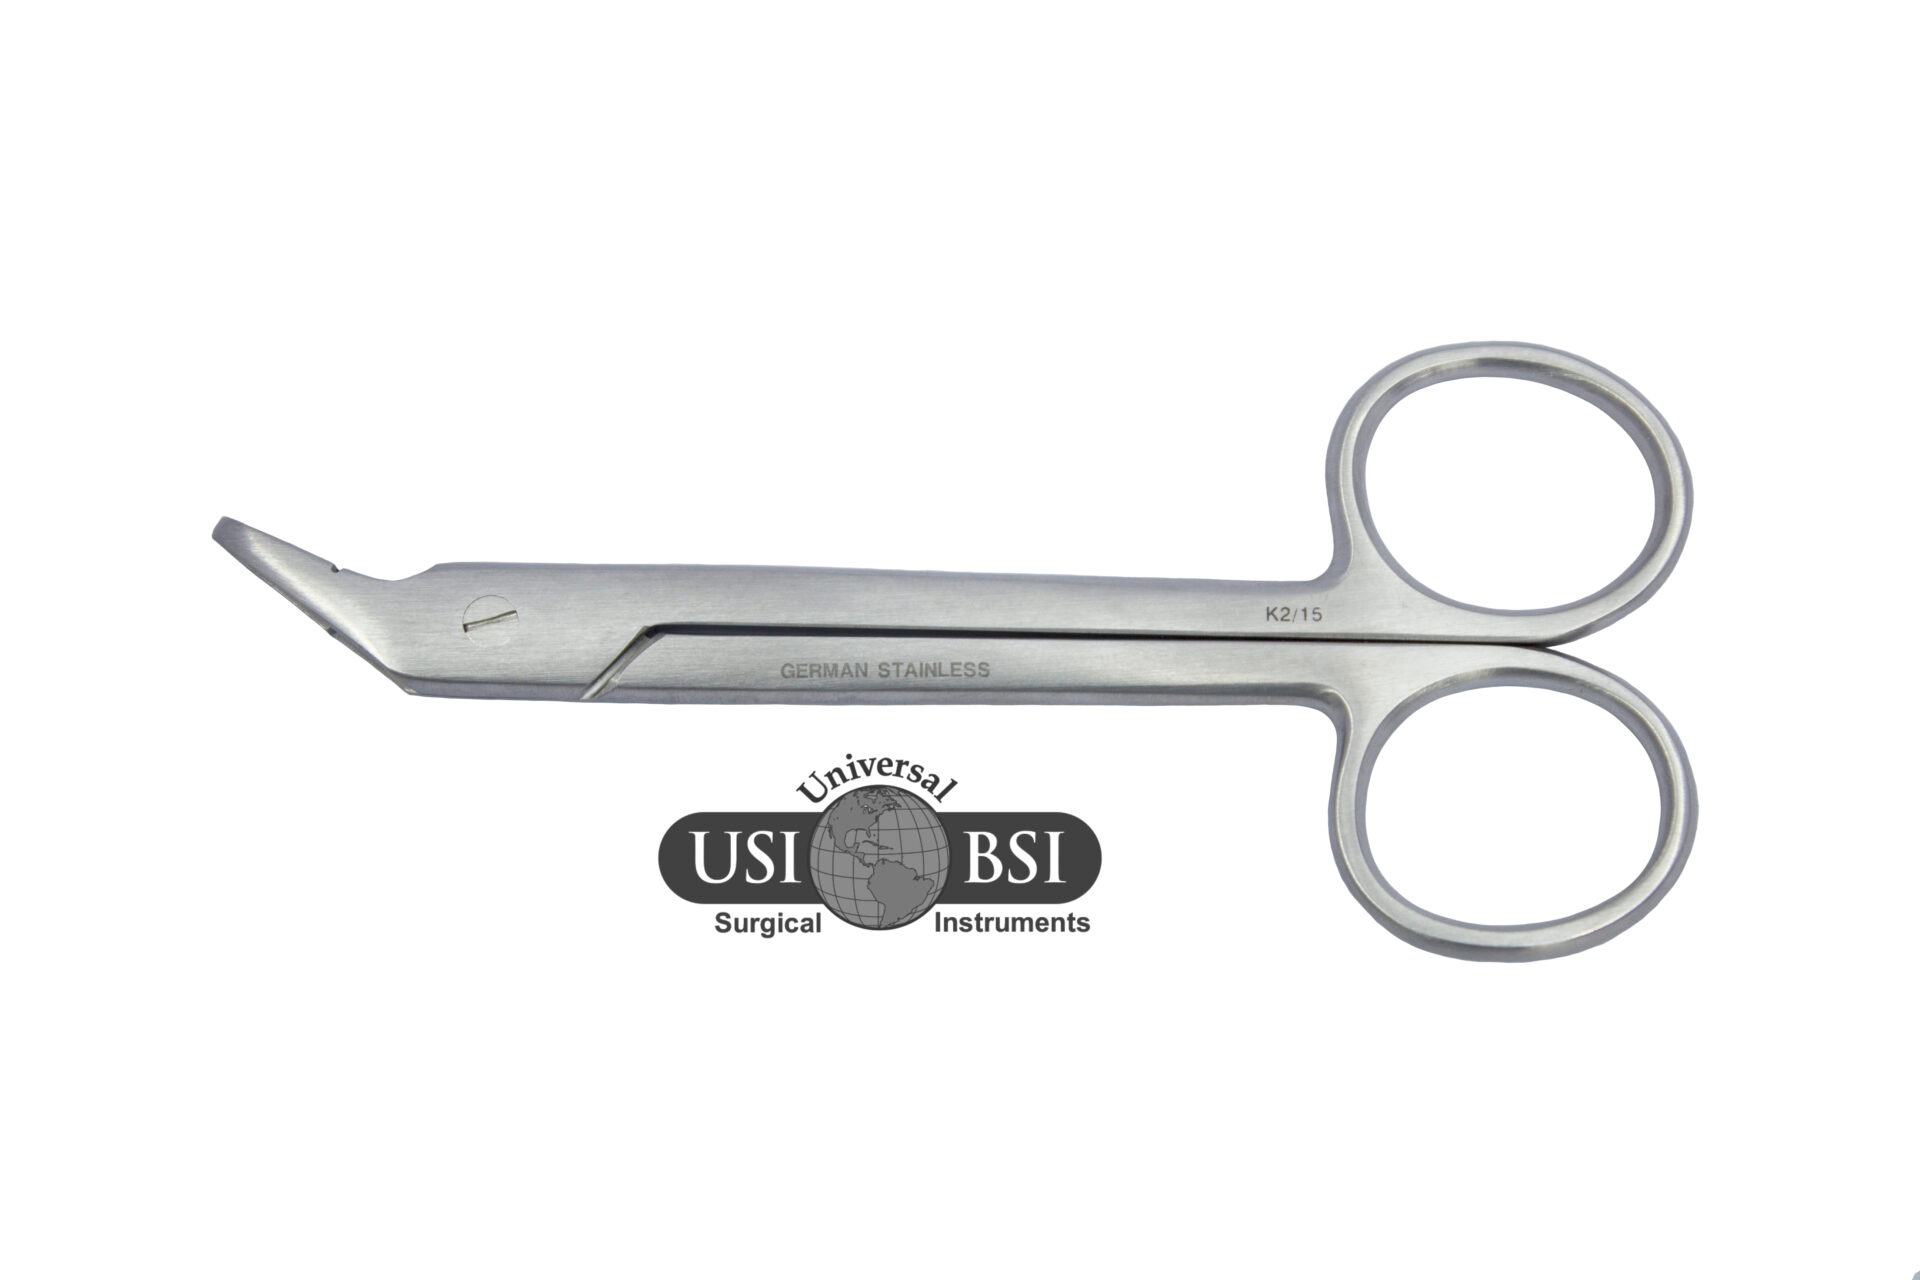 A pair of scissors with the us and bsi logo on them.